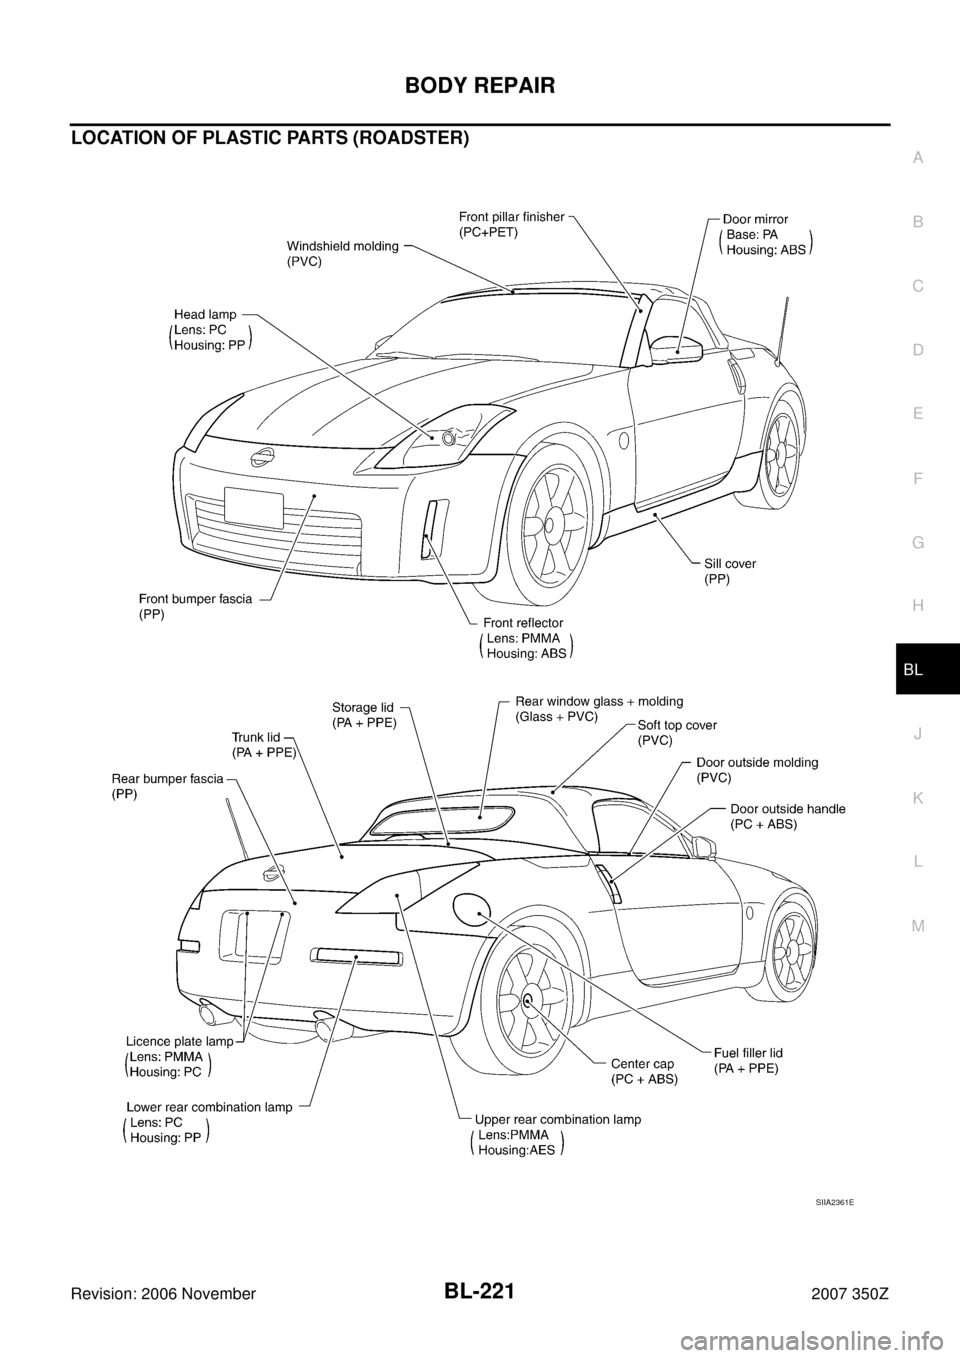 NISSAN 350Z 2007 Z33 Body, Lock And Security System Workshop Manual BODY REPAIR
BL-221
C
D
E
F
G
H
J
K
L
MA
B
BL
Revision: 2006 November2007 350Z
LOCATION OF PLASTIC PARTS (ROADSTER)
SIIA2361E 